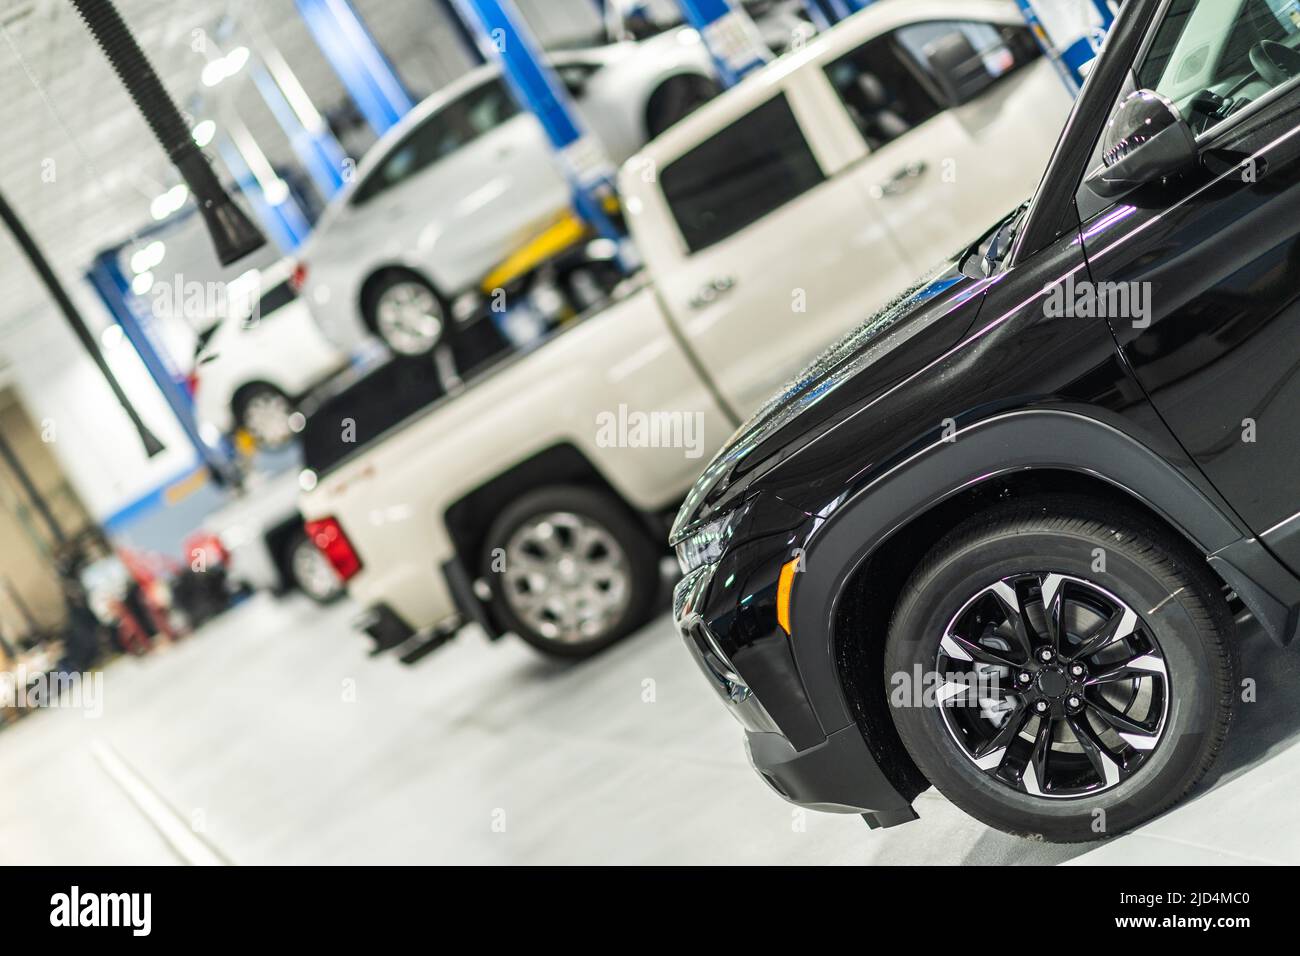 Professional Car Service and Detailing Facility Interior View. Cars Parked in a Line in a Queue for Maintenance and Repair Work. Work organization of Stock Photo